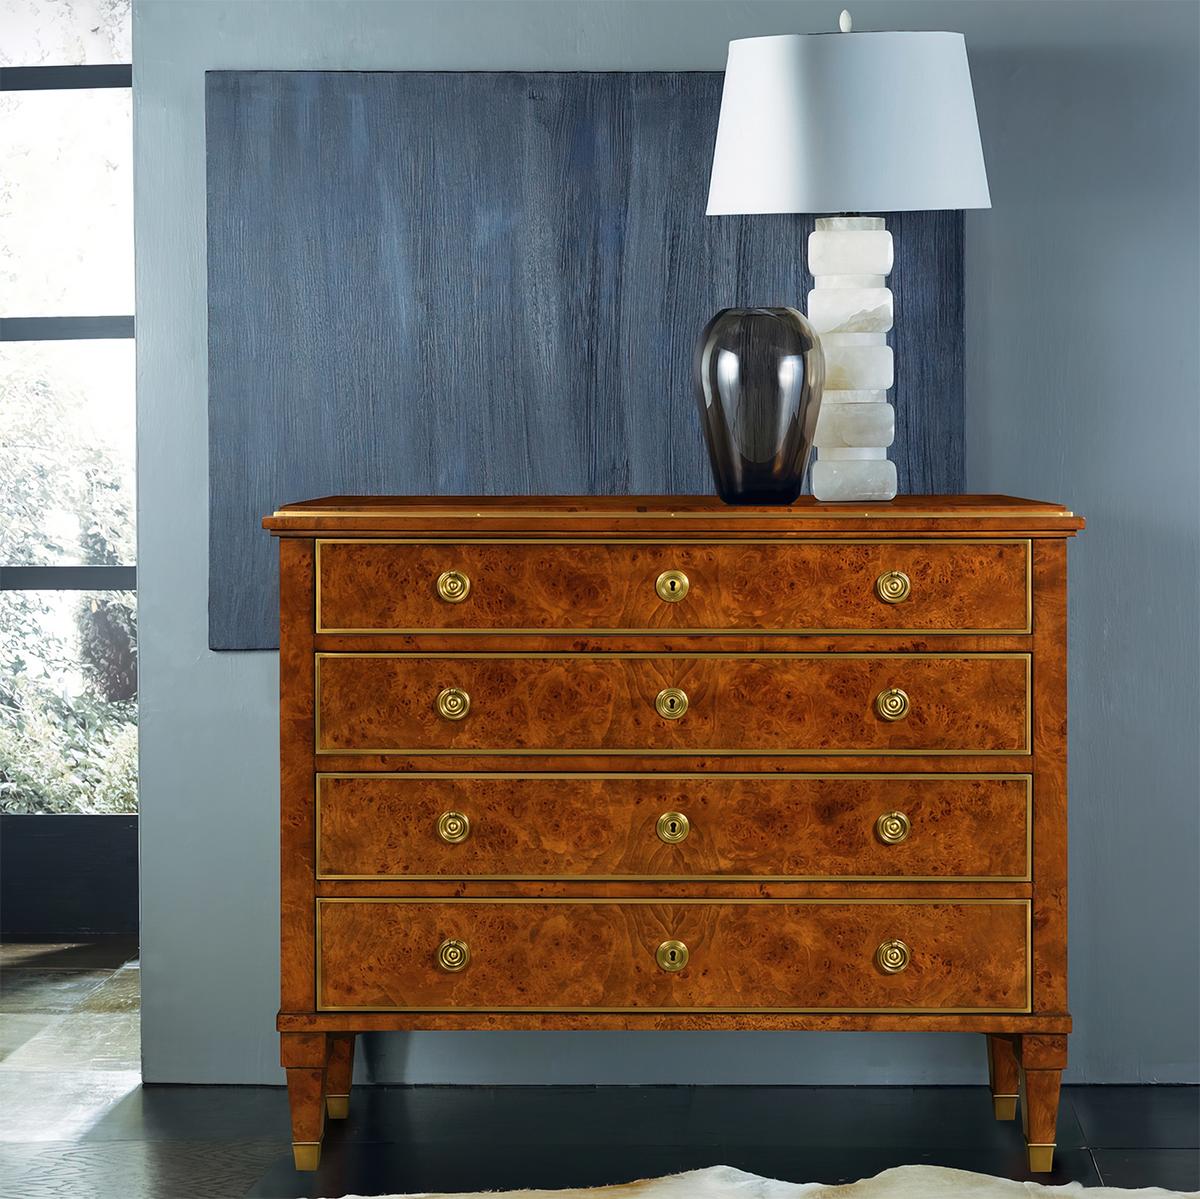 The four-drawer chest is wrapped in a gorgeous Birch burl veneer. An exotic figured wood with a high polish to highlight the movement and unusual details. The rectangular top and drawer fronts are framed with solid brass trim and the drawers have